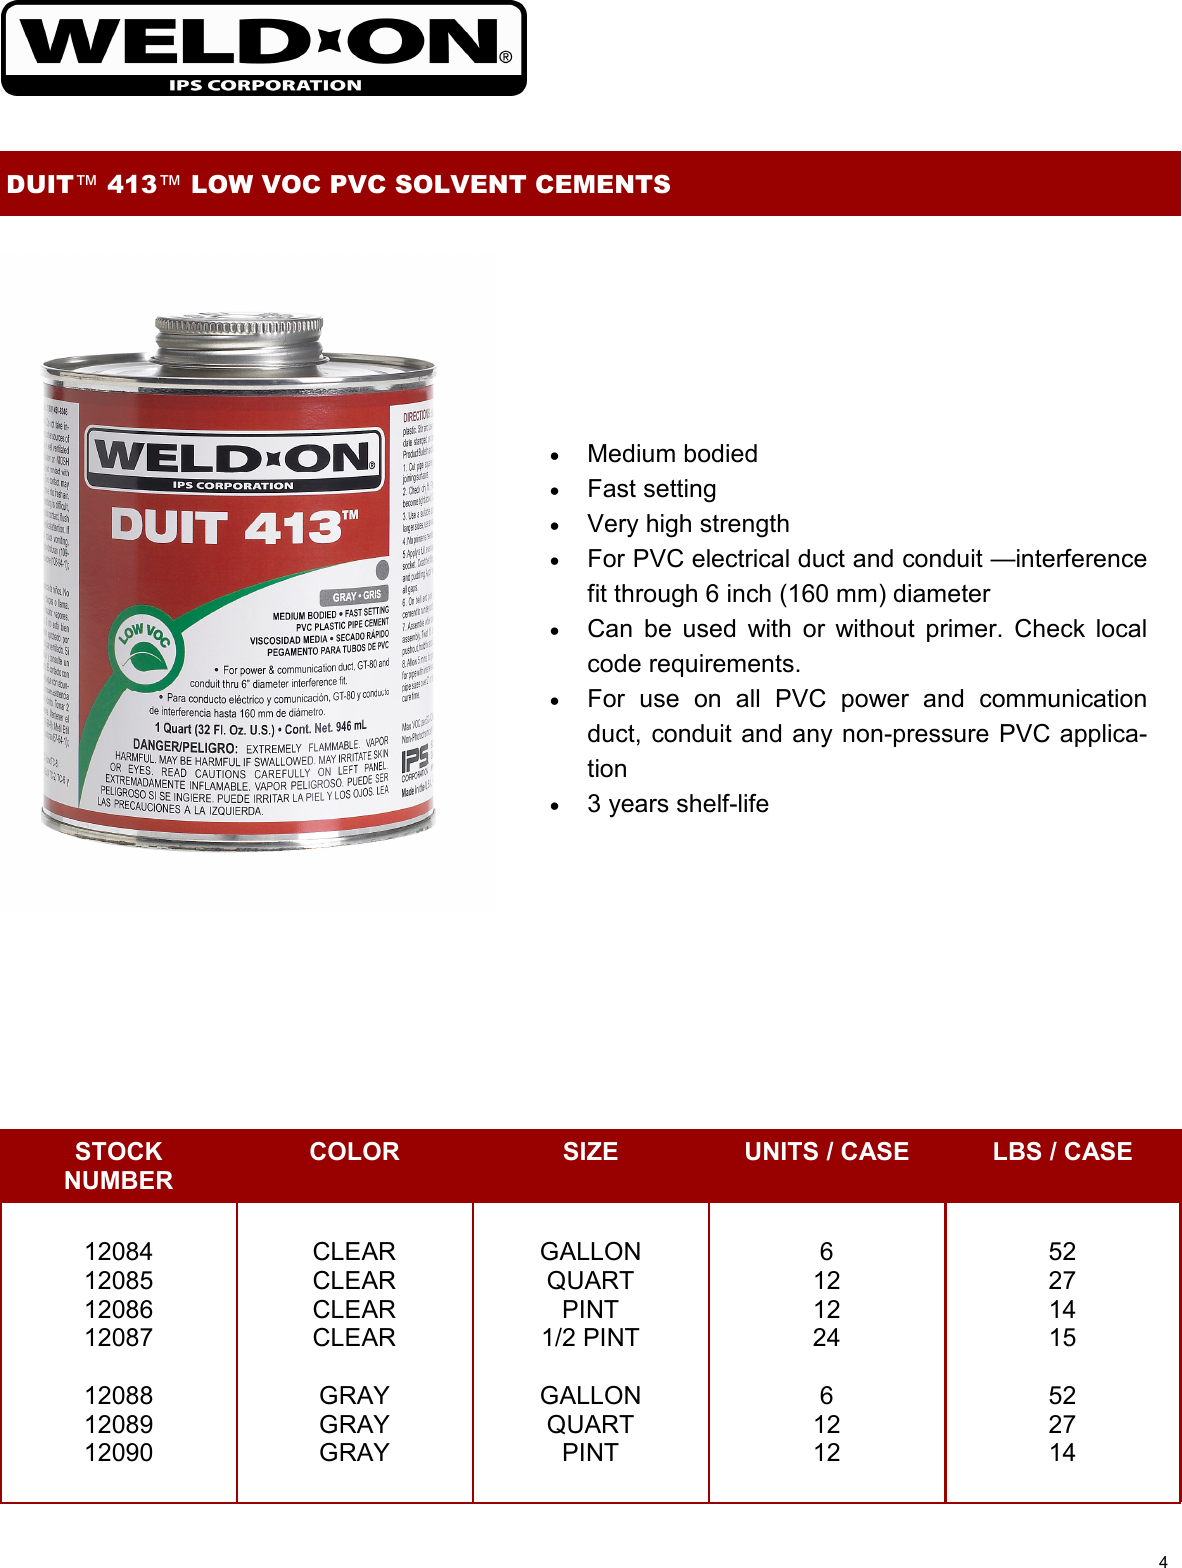 Page 5 of 12 - Duit Product Guide 09-2009